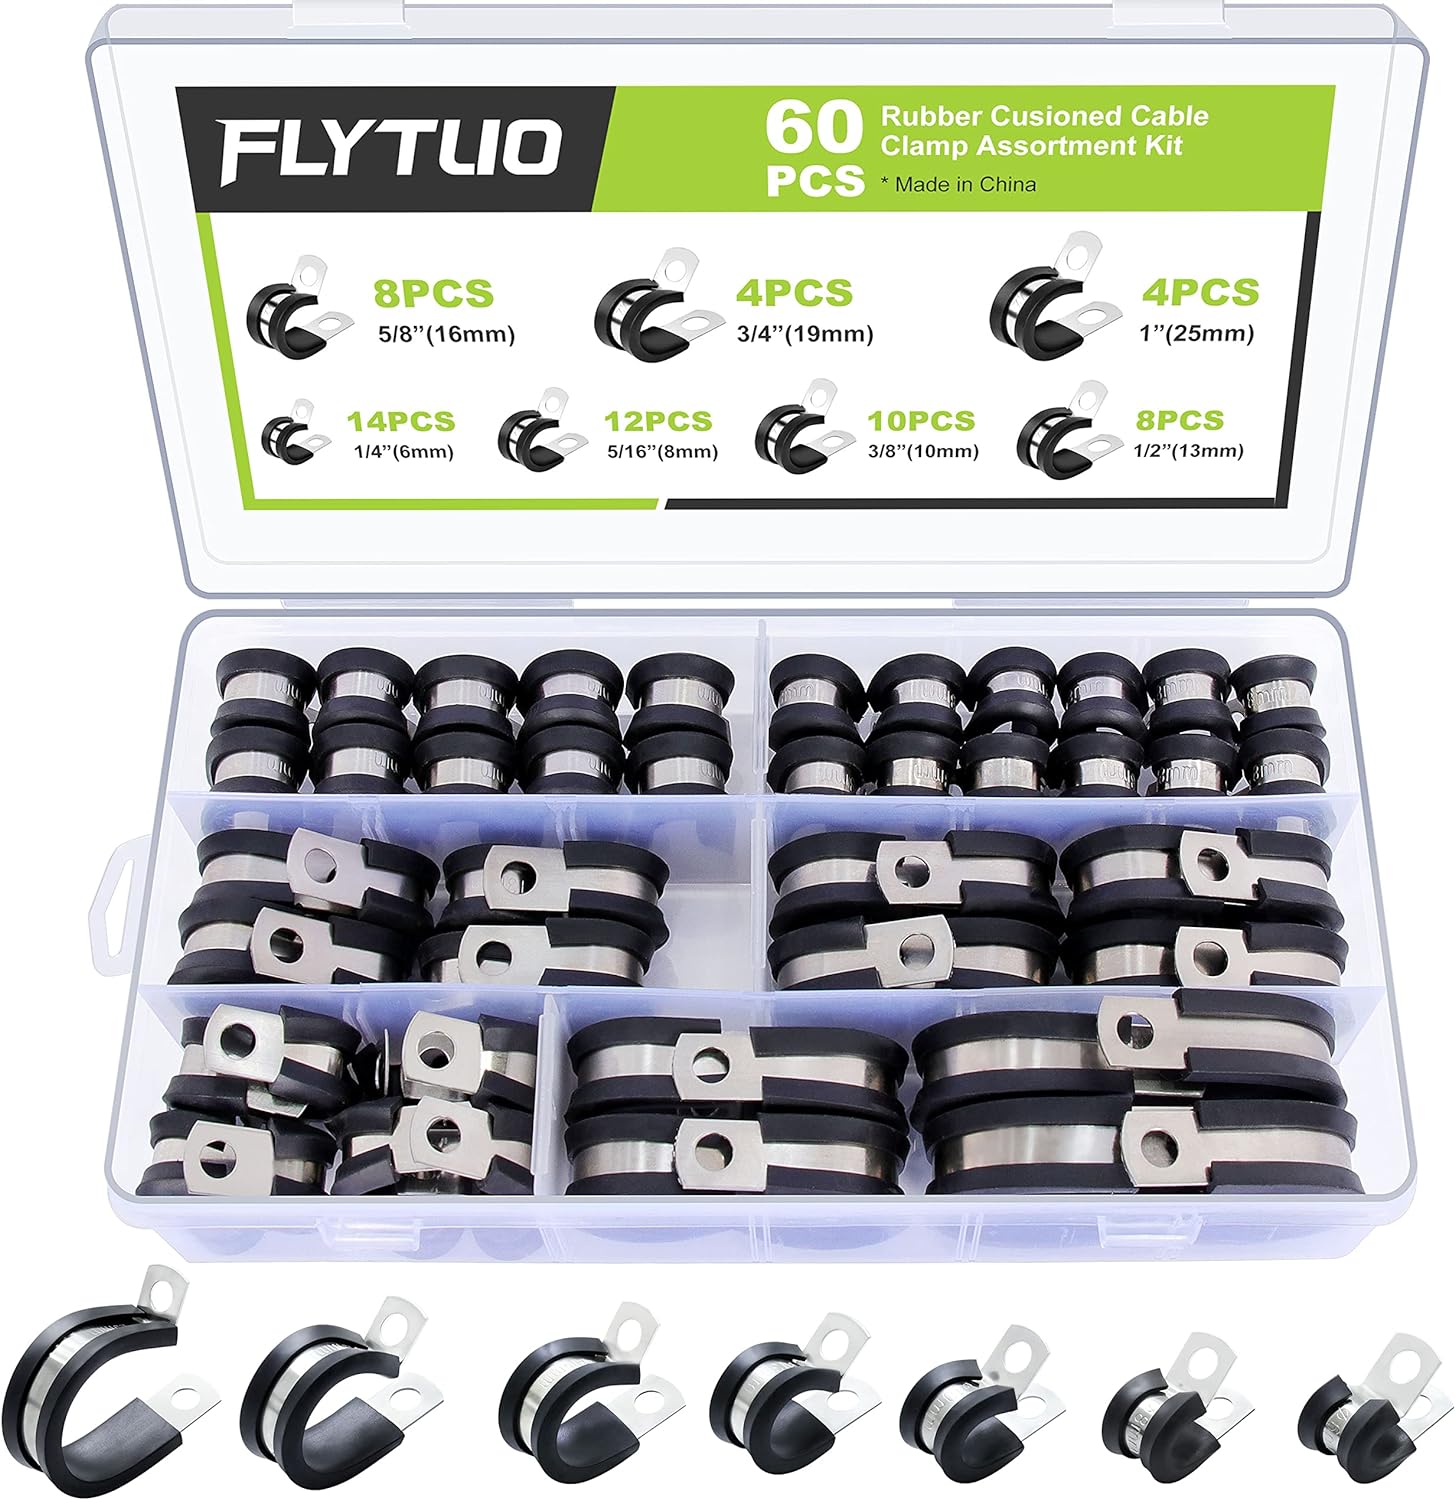 Wenzhou Zhijun Trading Co.,Ltd 60PCS Cable Clamps Assortment Kit, Flytuo 304 Stainless Steel Rubber Cushion Pipe Clamps in 7 Sizes 1/4" 5/16" 3/8